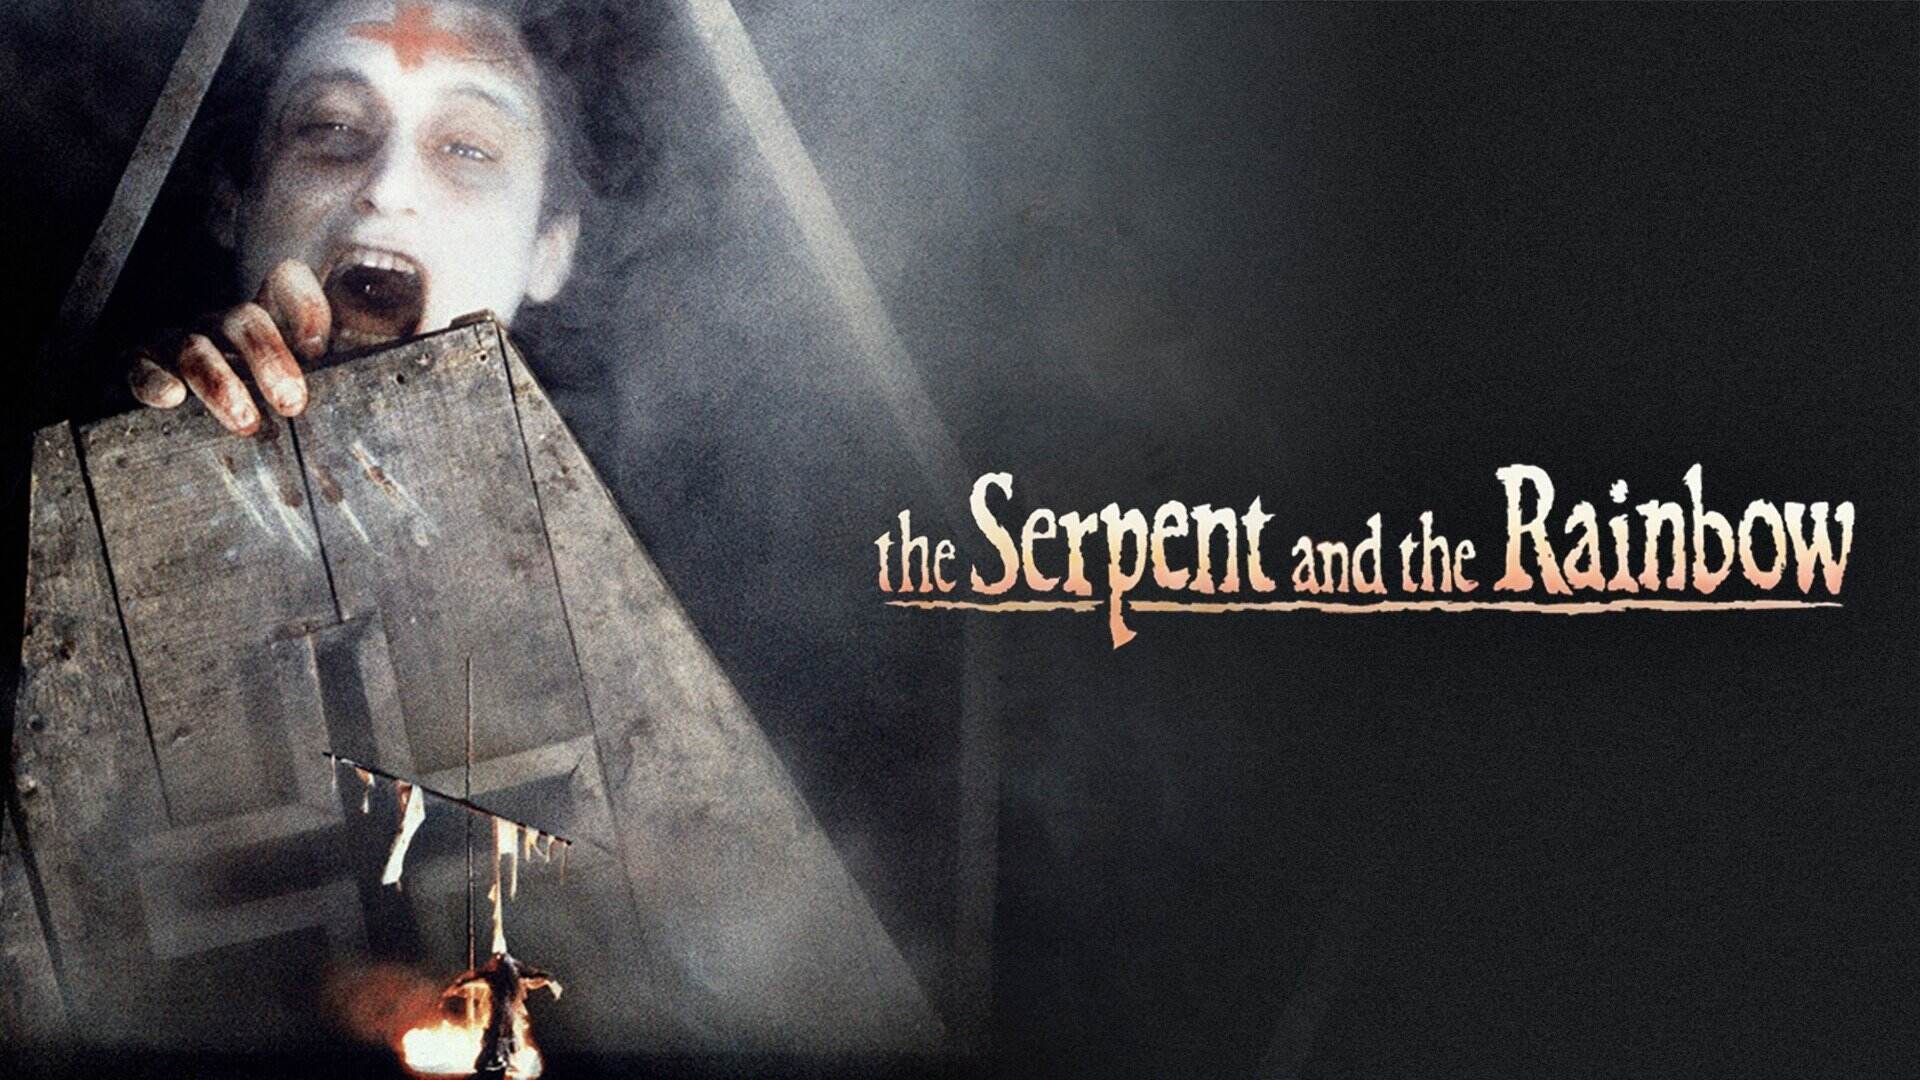 43-facts-about-the-movie-the-serpent-and-the-rainbow